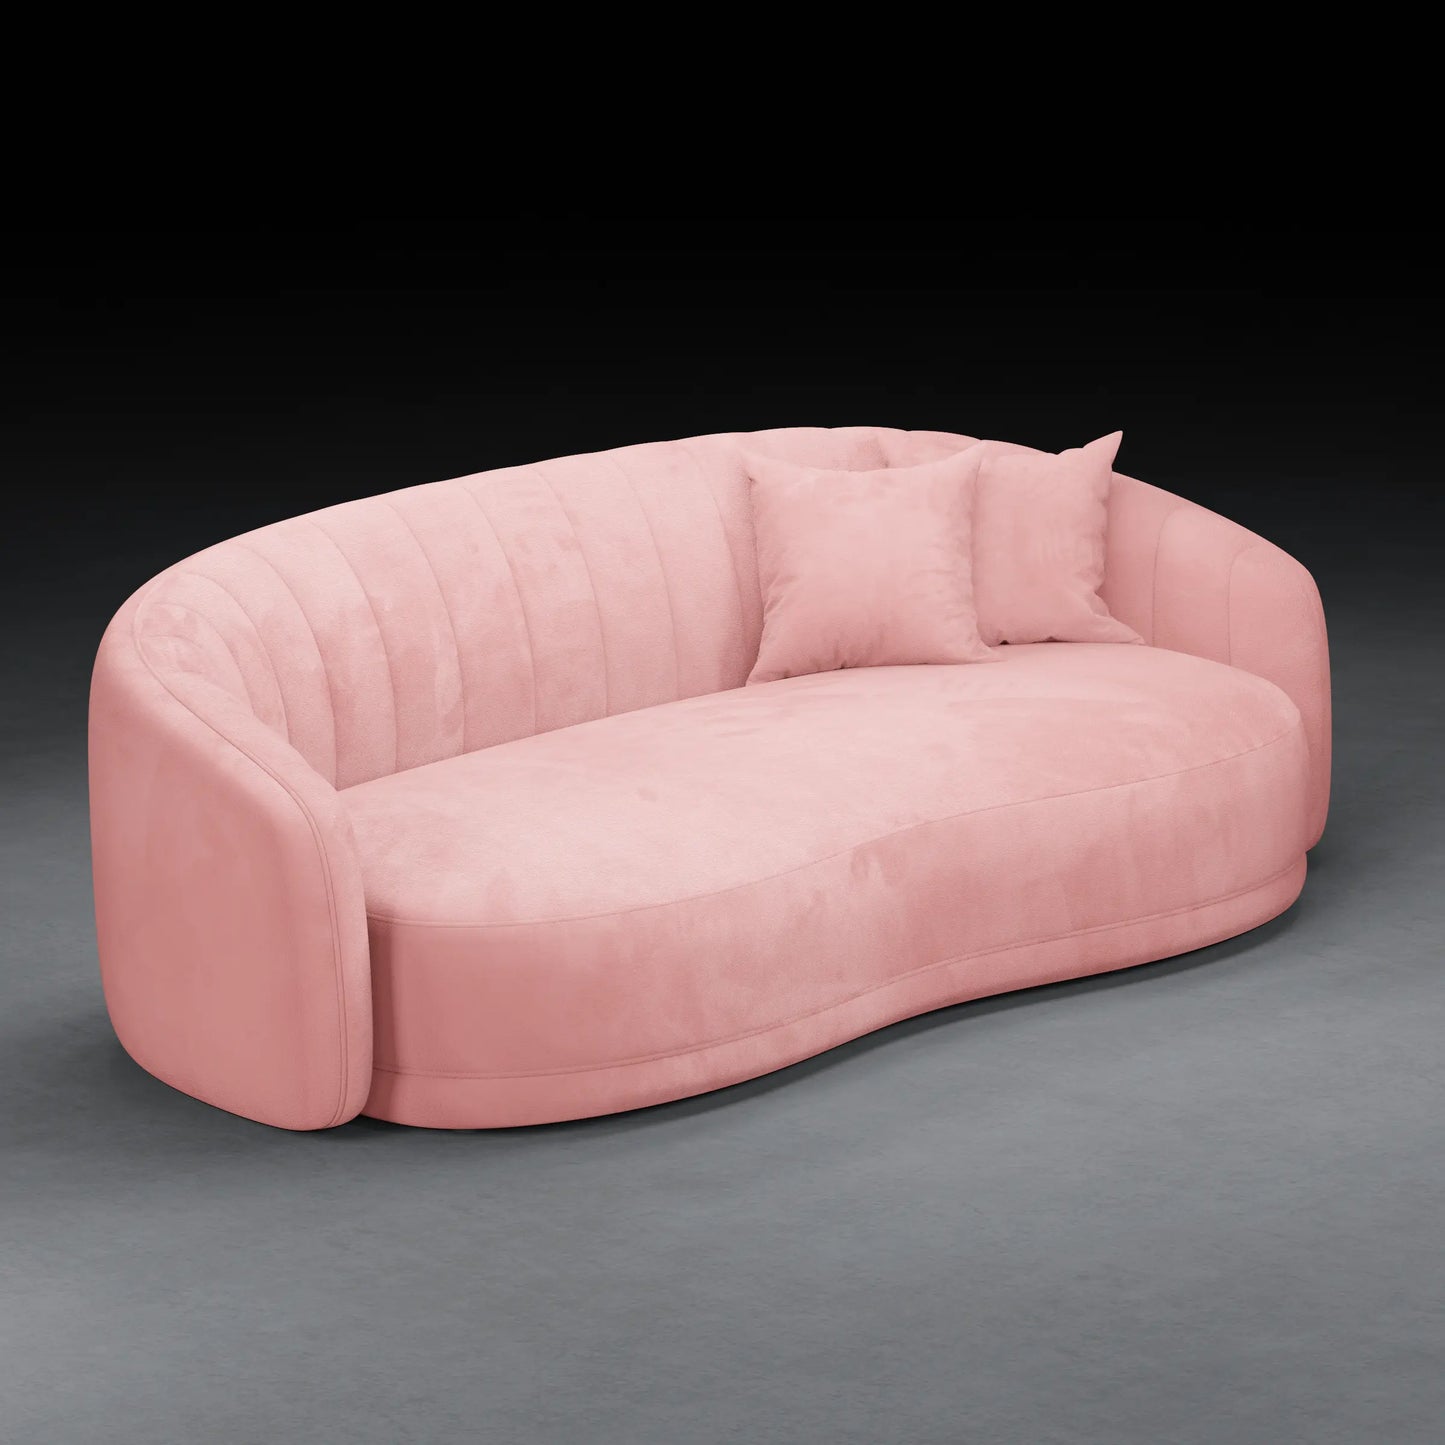 LILY - 3 Seater Couch in Velvet Finish | Pink Color